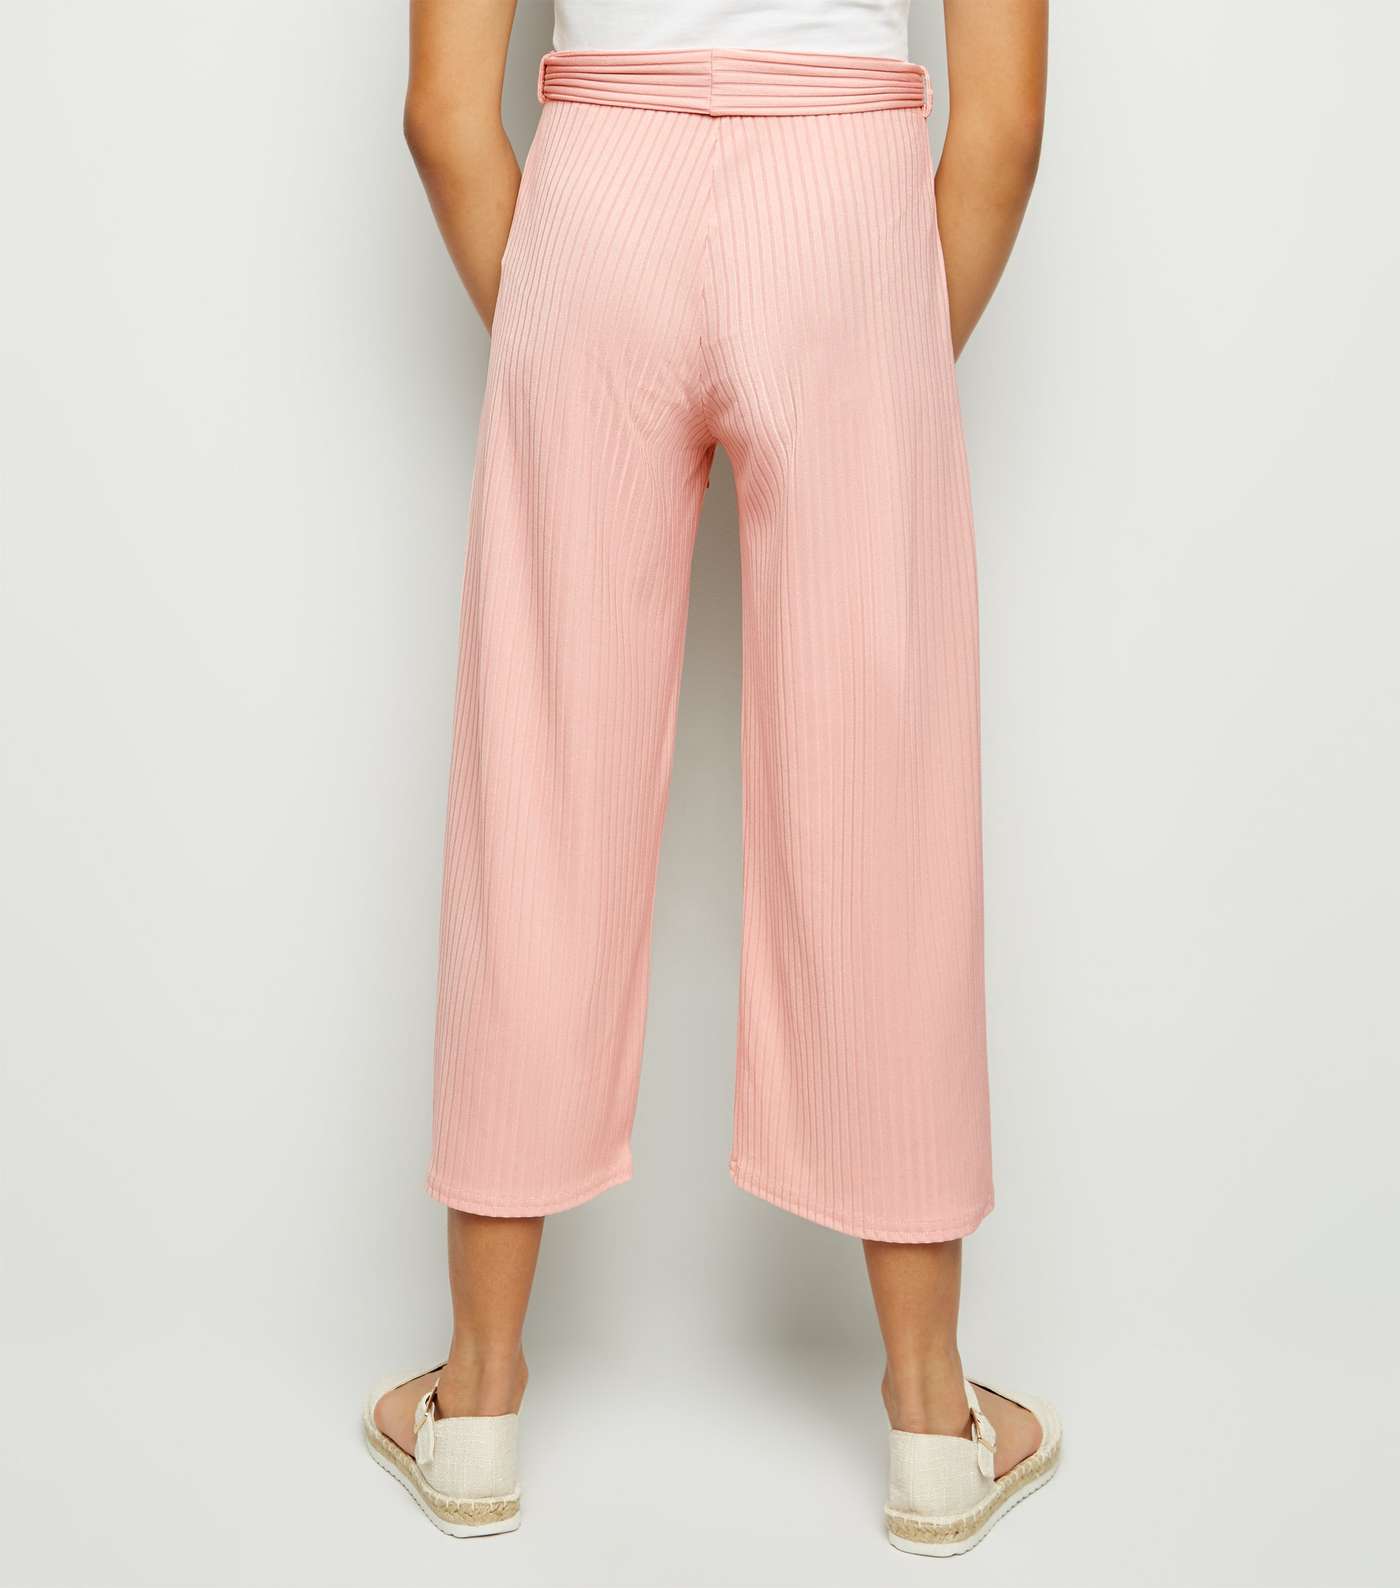 Girls Pale Pink Ribbed Culottes Image 3